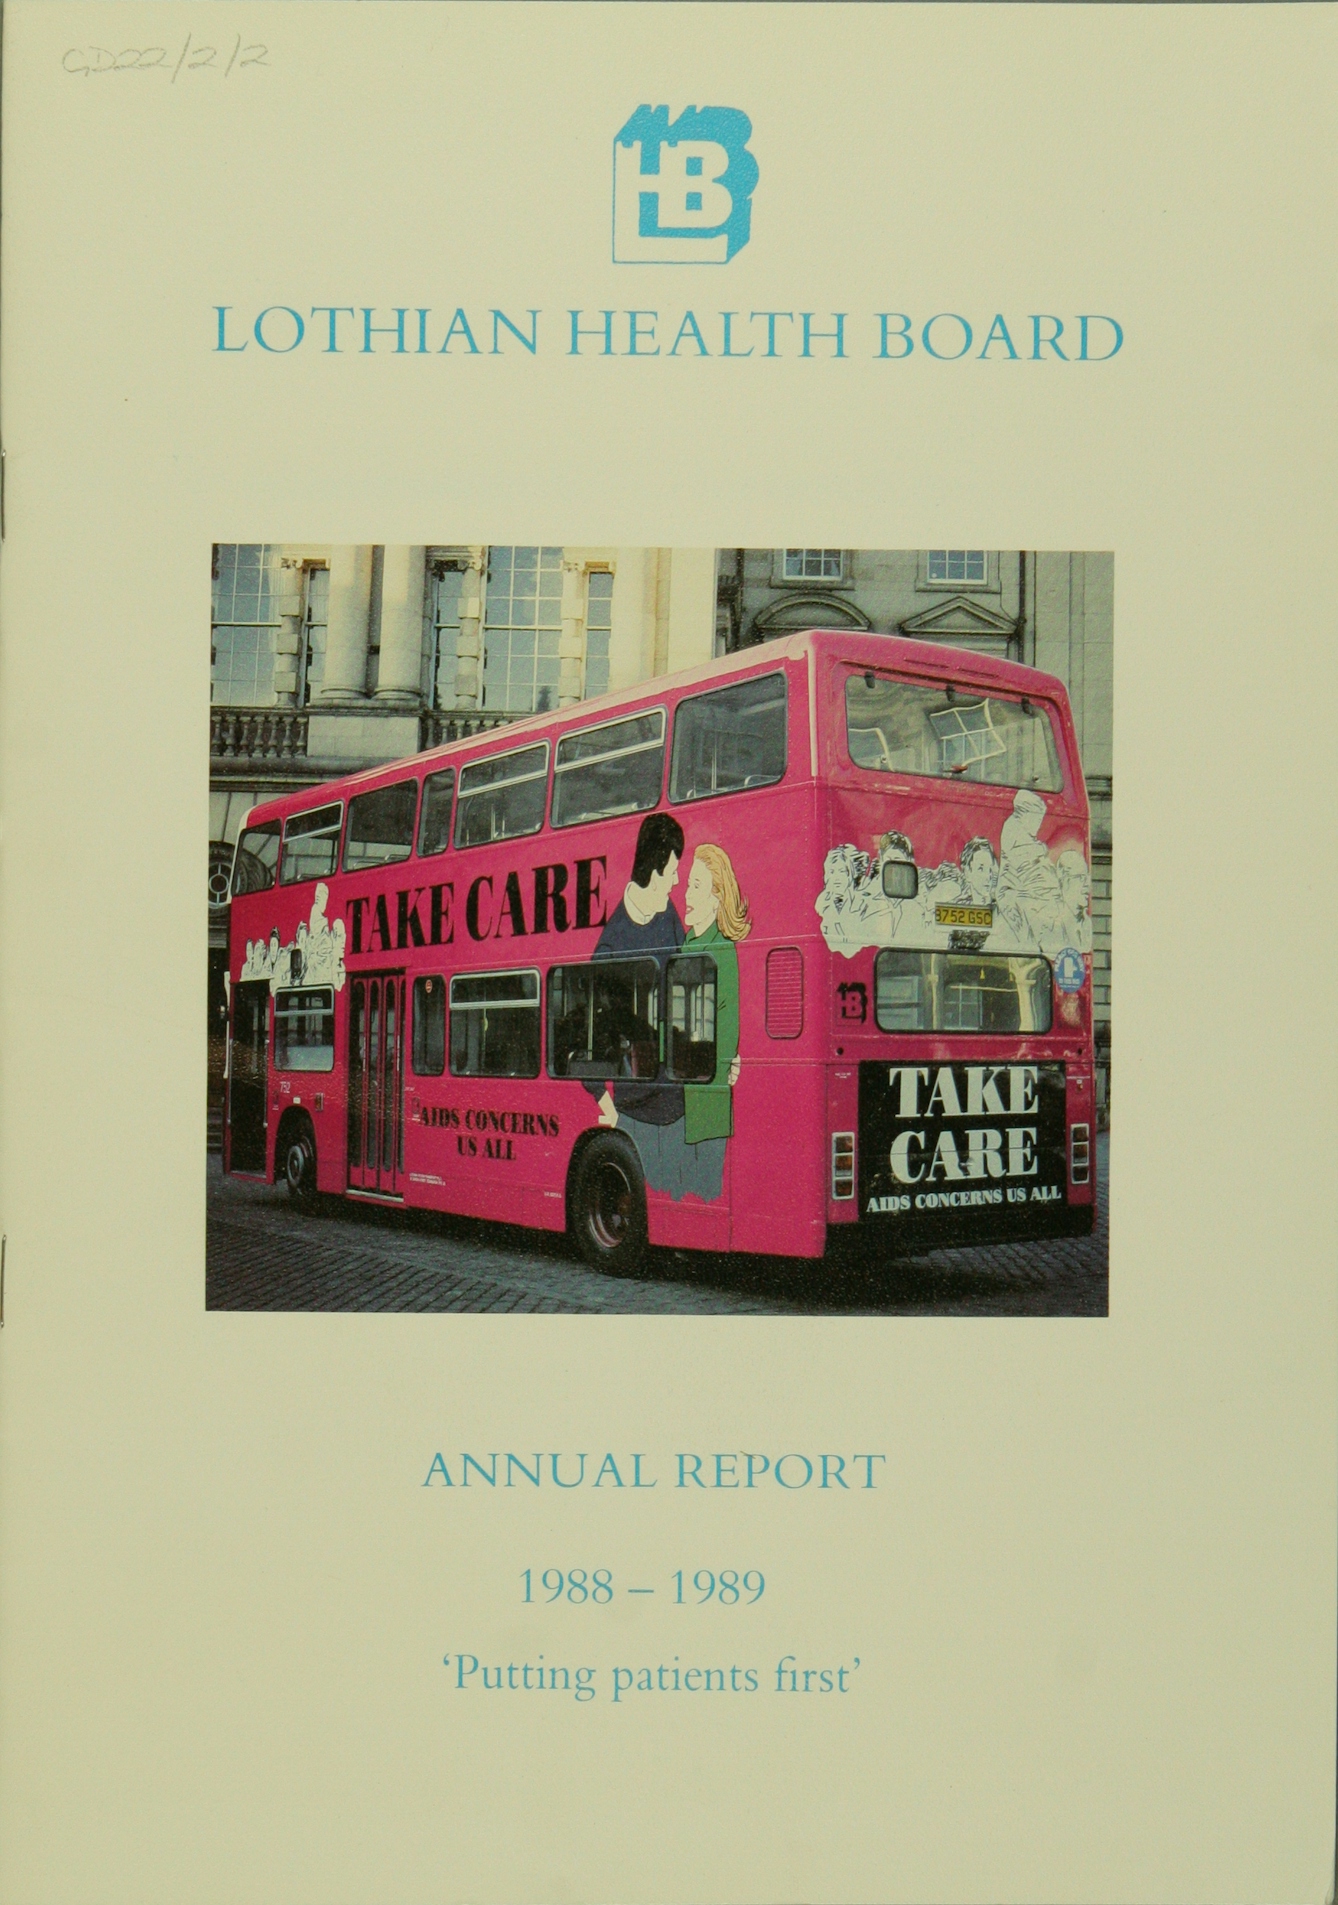 Colour image of the front cover if the Lothian Health Board annual report for 1988-89, featuring a pink bus that says "Take care" in large letters and AIDS concerns us all" in smaller letters at the base of the bus. 